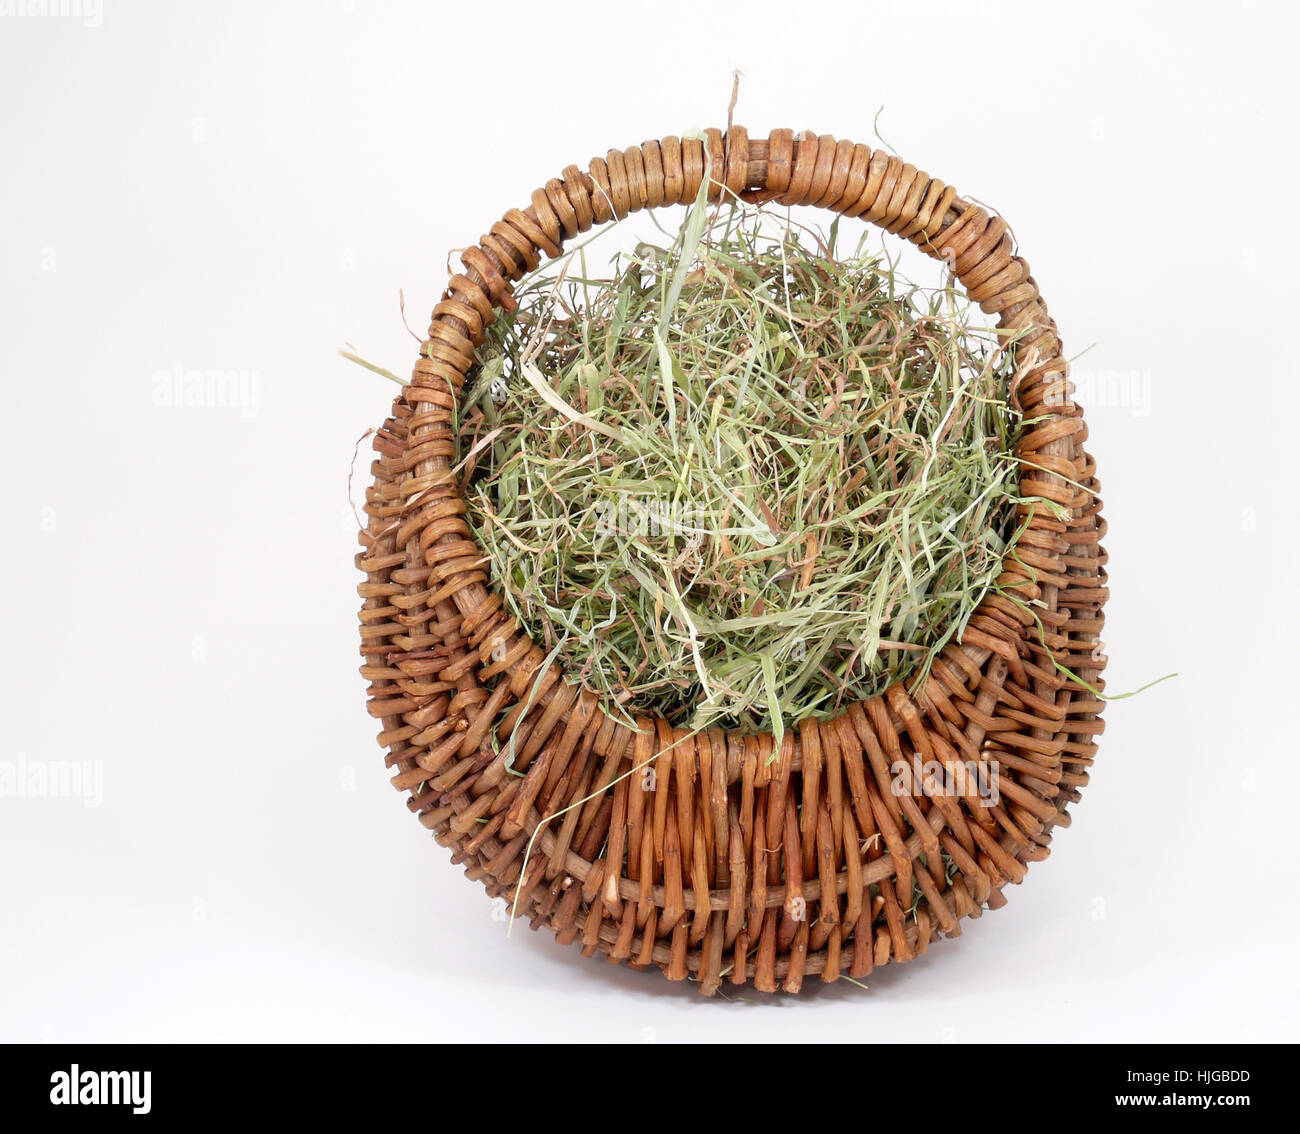 basket, hay, wicker basket, collect, meadow, grass, lawn, green, collecting, Stock Photo